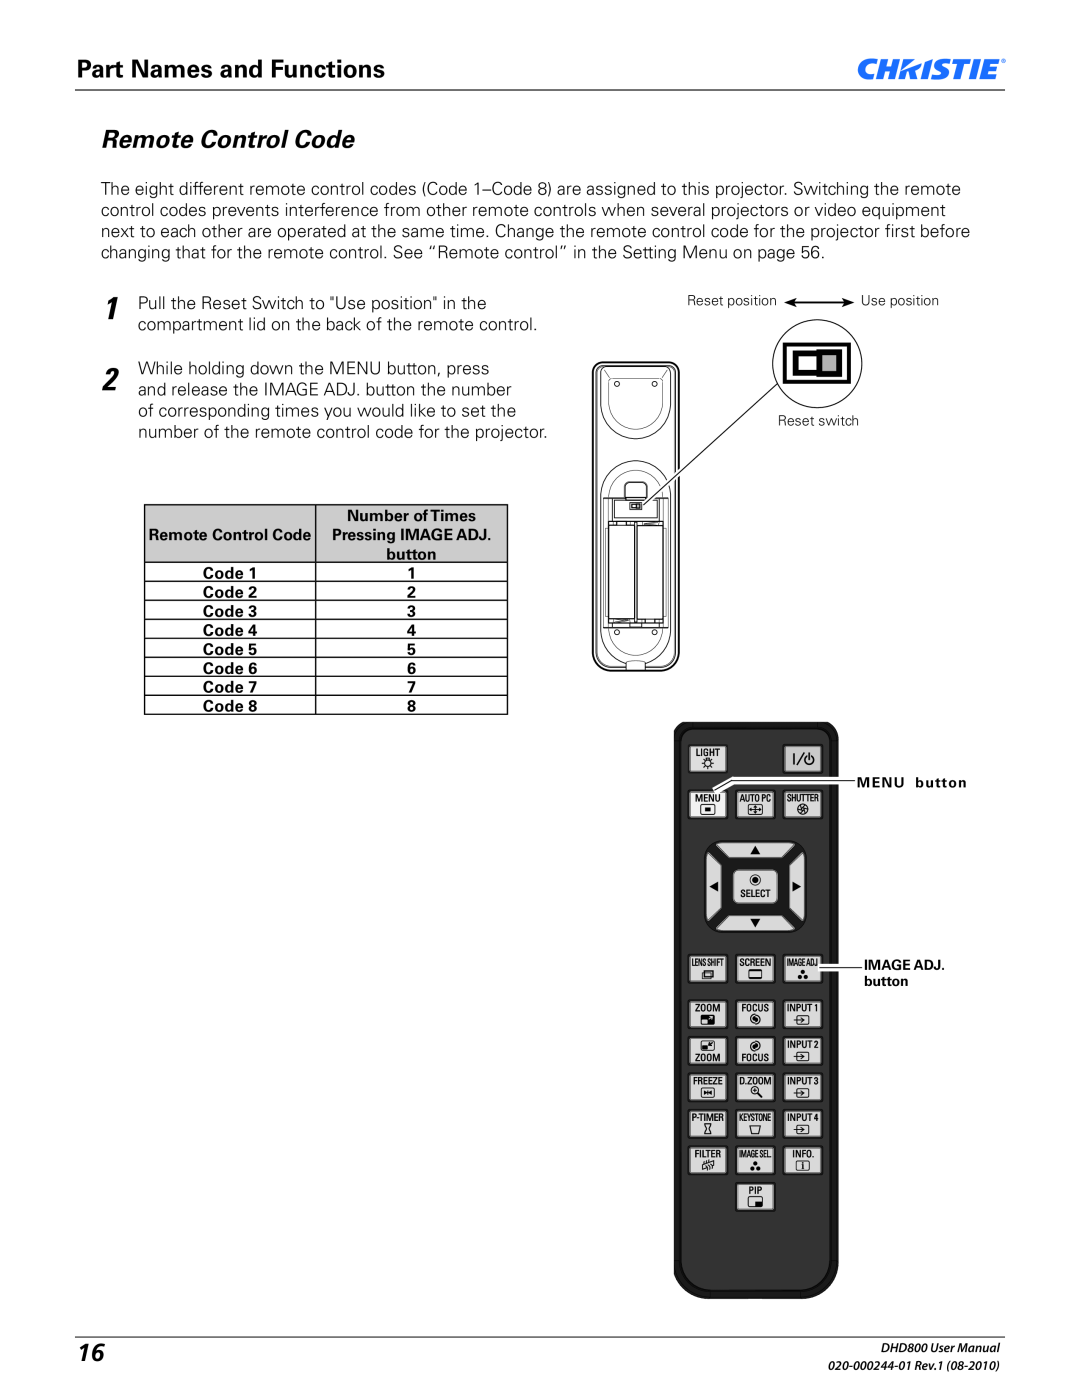 Christie Digital Systems DHD800 user manual Remote Control Code, Part Names and Functions 